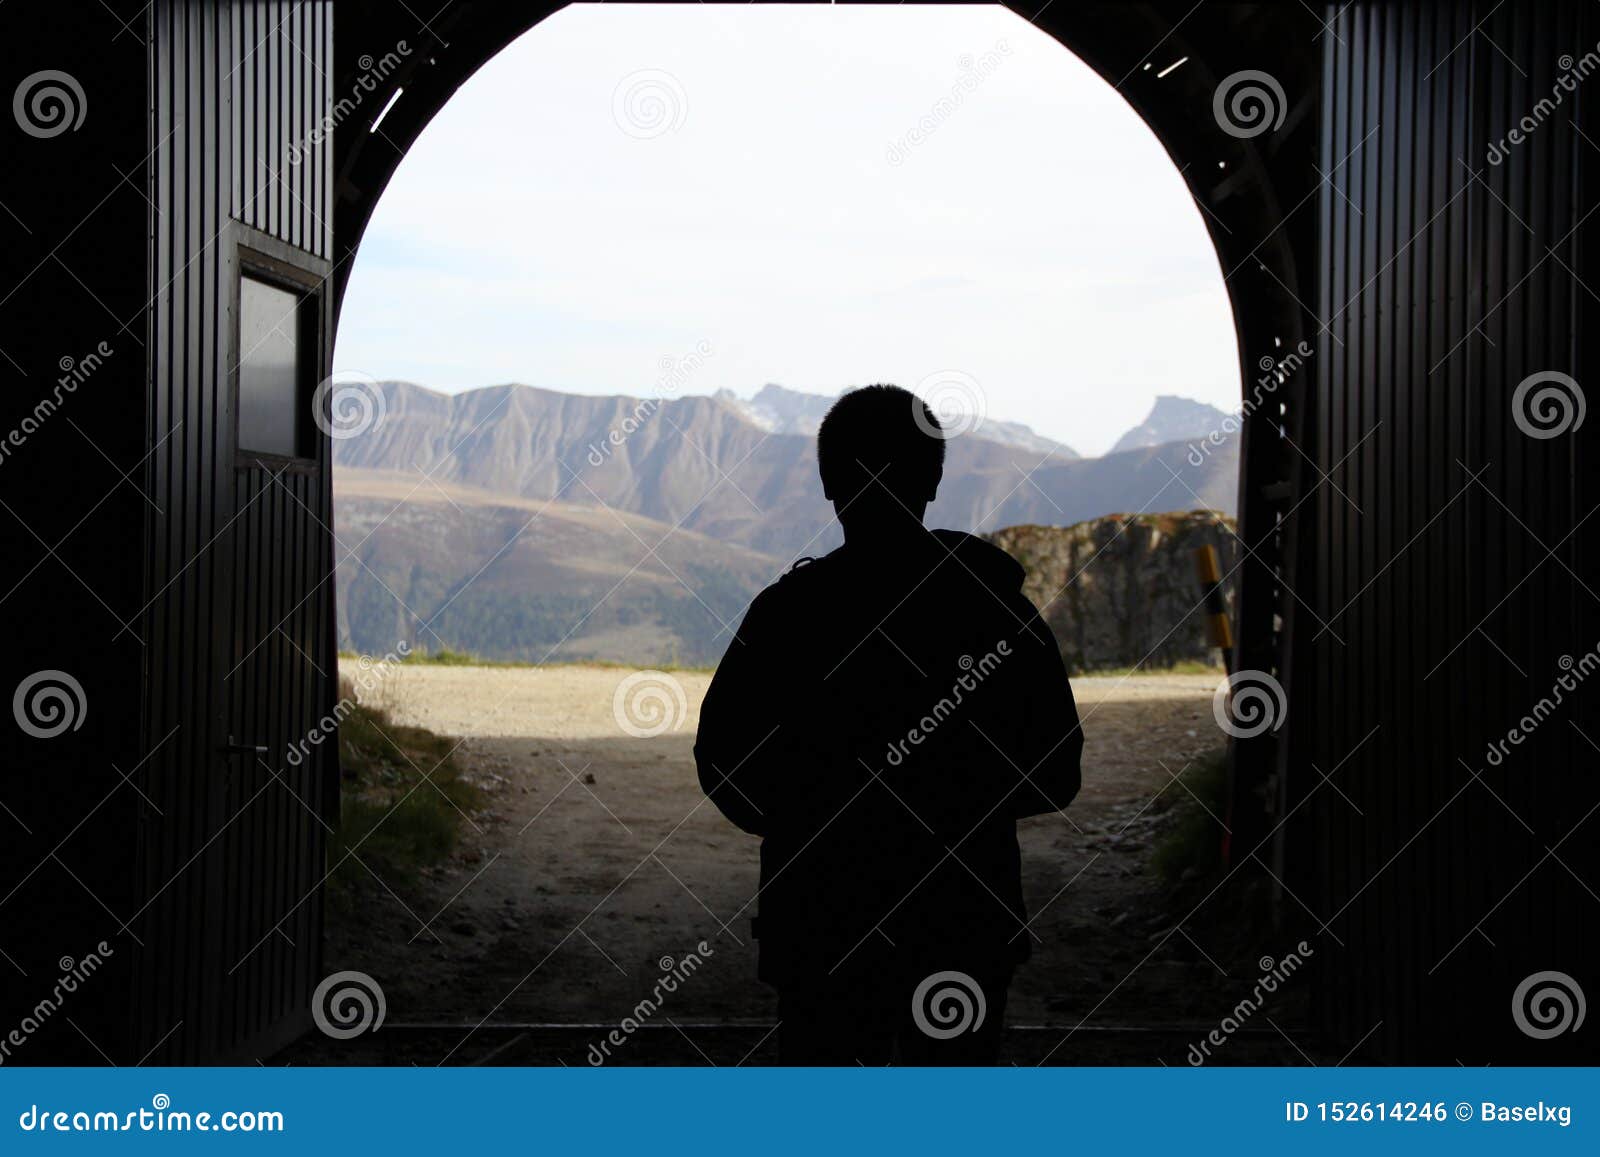 The Silhouette Of Man Walking Out From The Tunnel Stock Photo - Image ... Silhouette Man Walking Tunnel